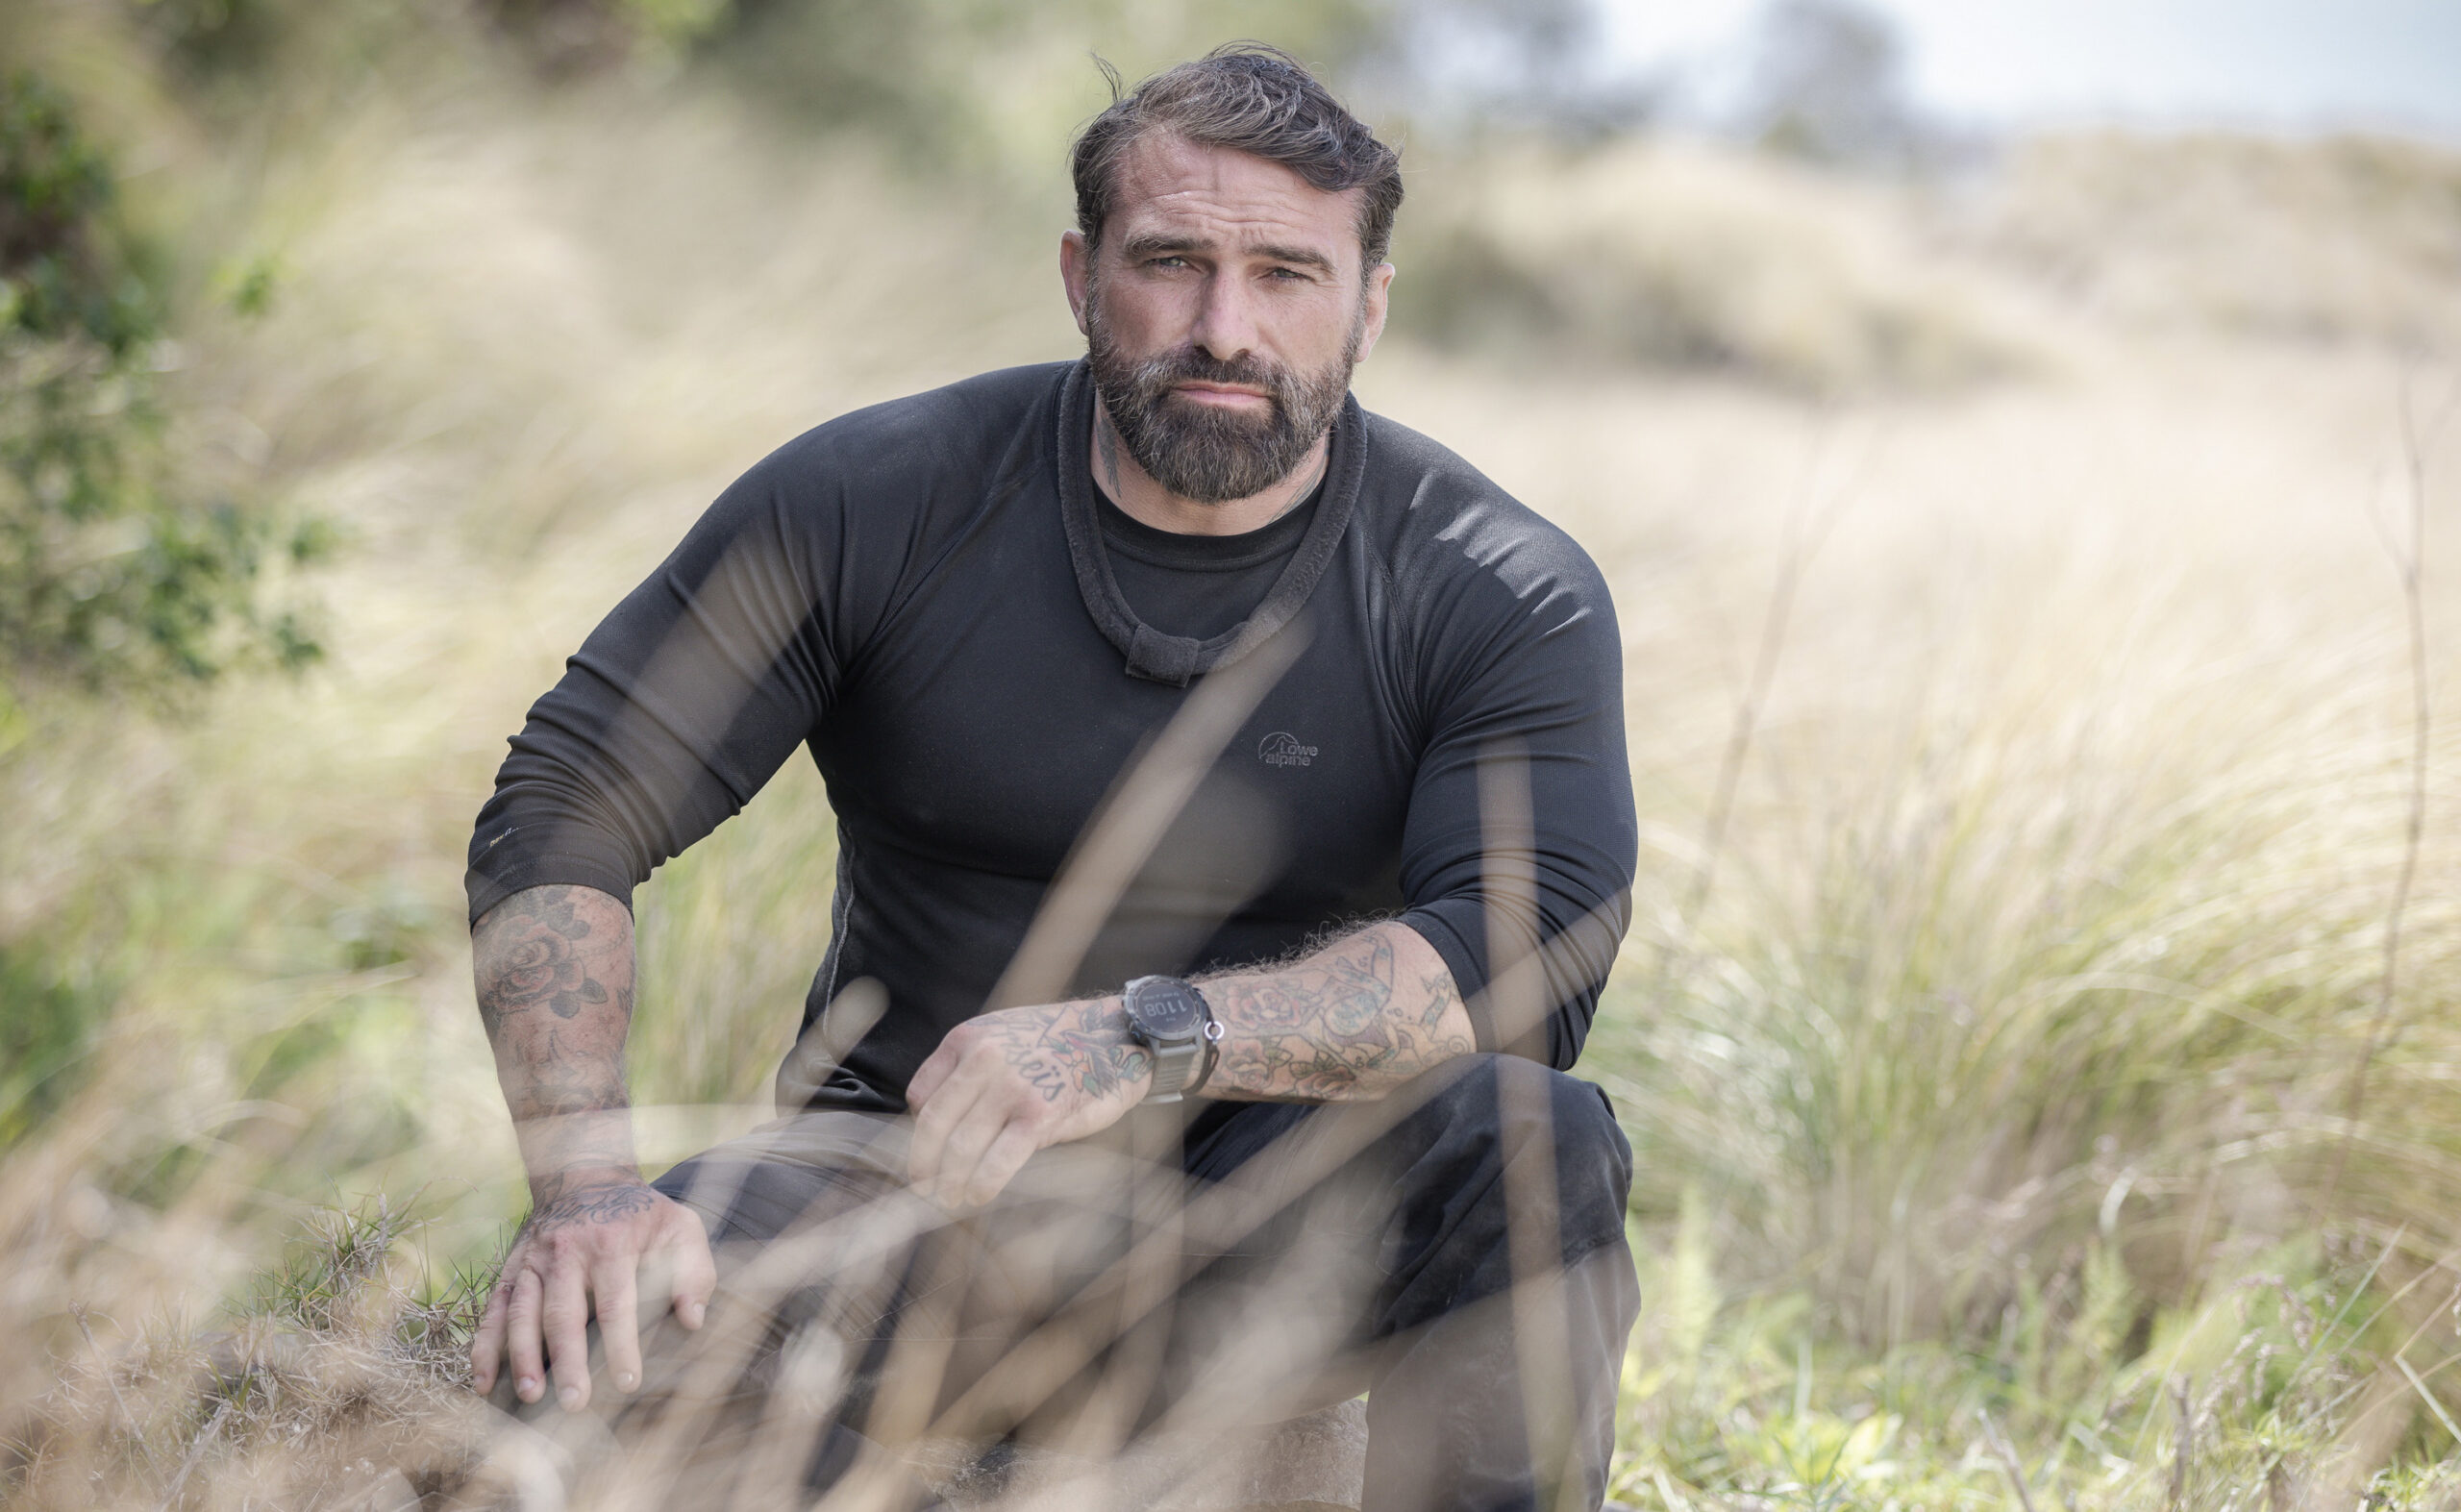 SAS Australia’s Ant Middleton set to star in brutal new reality show: “Think The Hunger Games meets Lost”